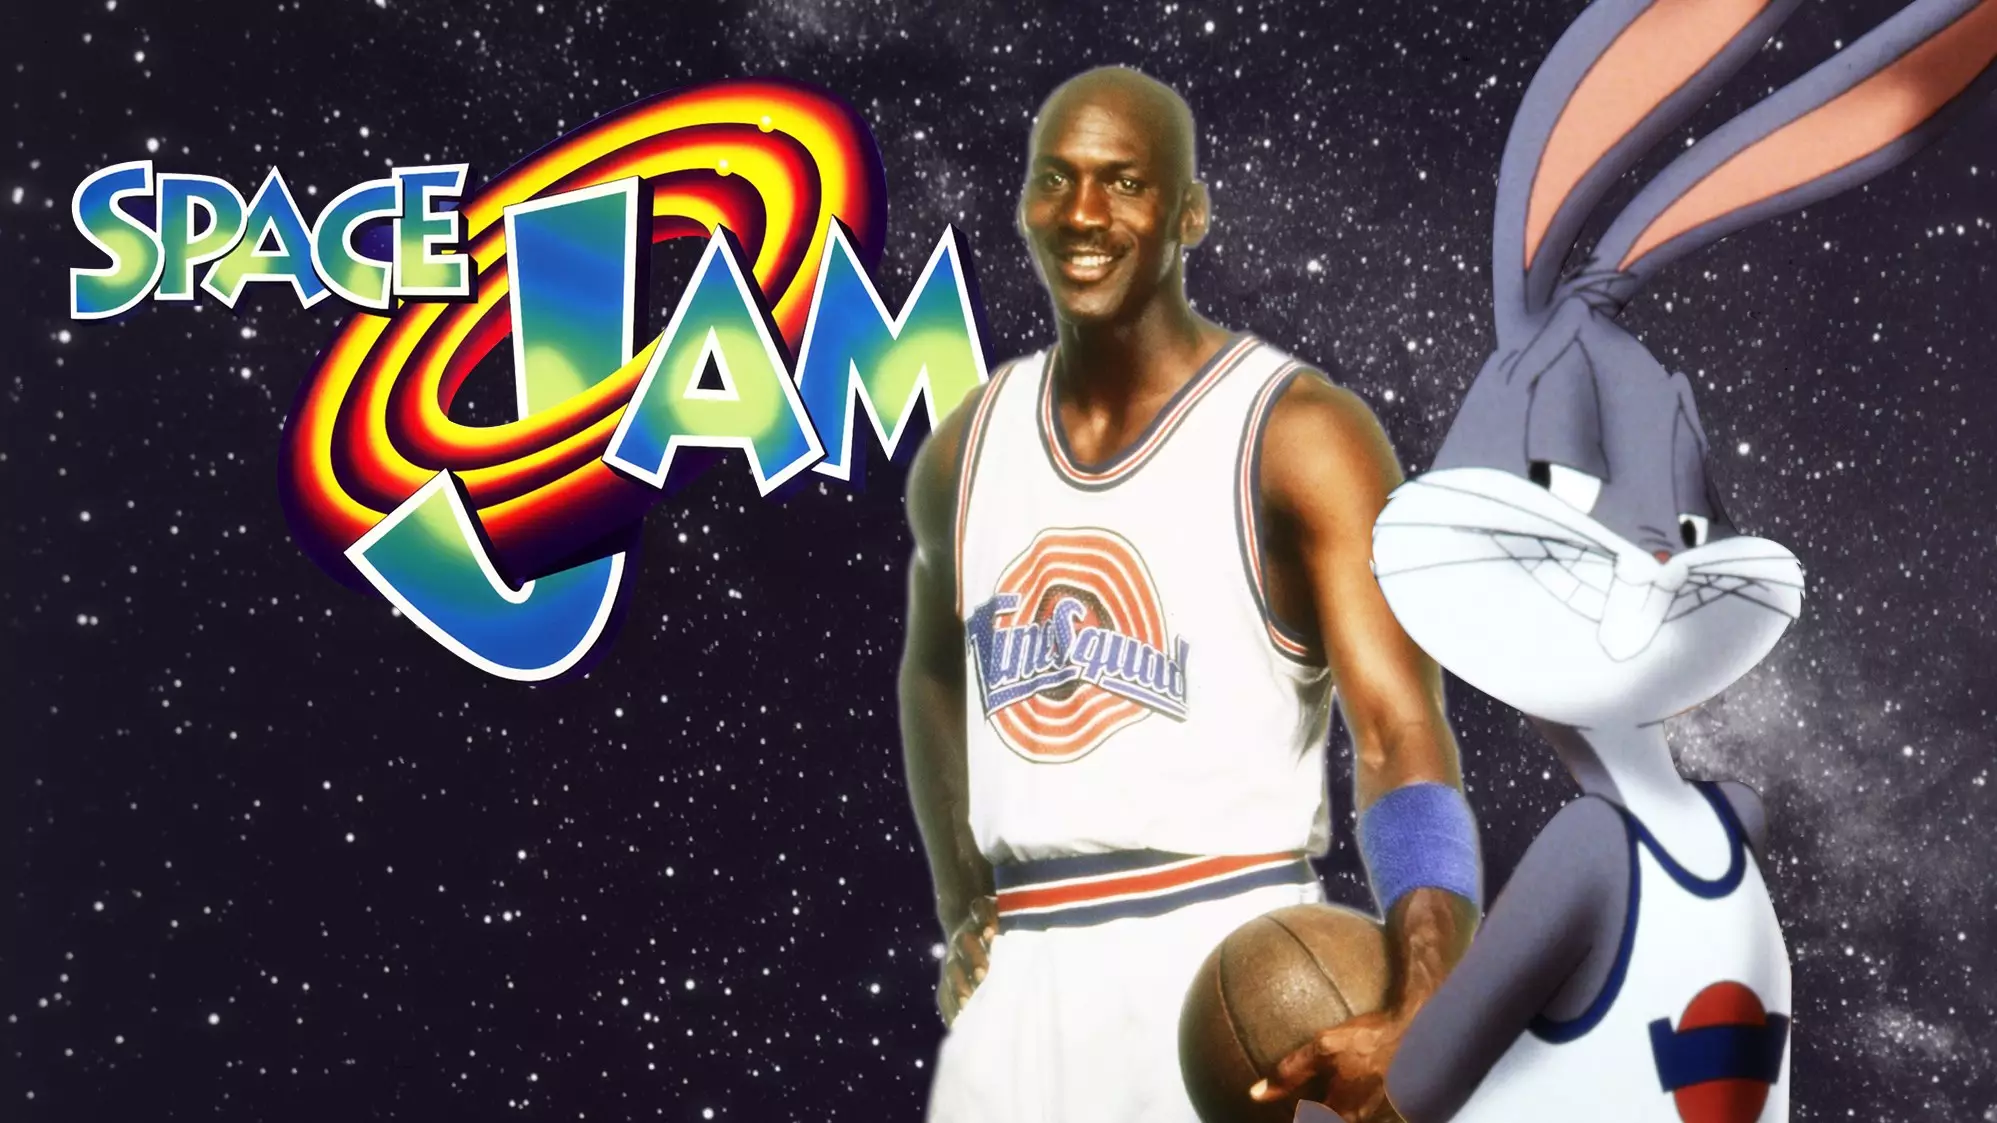 Space Jam Will Be On ITV2 This Afternoon